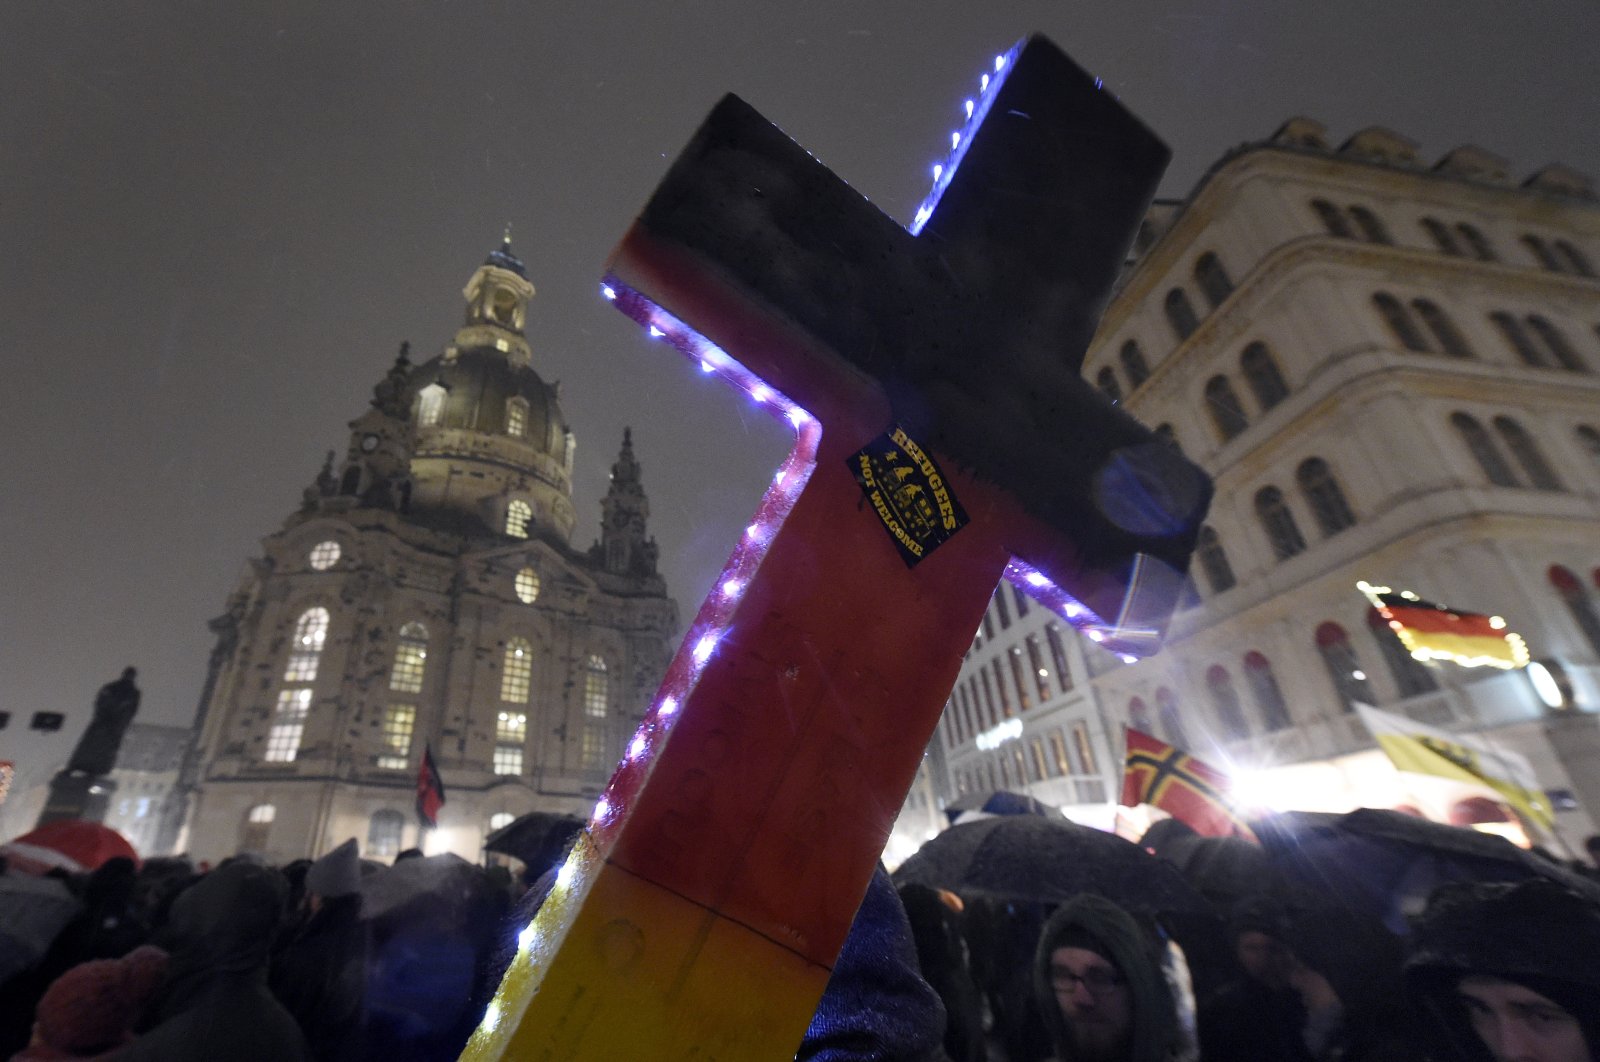 An illuminated cross with a sticker reading "refugees not welcome" is pictured during a demonstration of PEGIDA close to the Frauenkirche church in Dresden, eastern Germany, Feb. 29, 2016. (AP Photo)